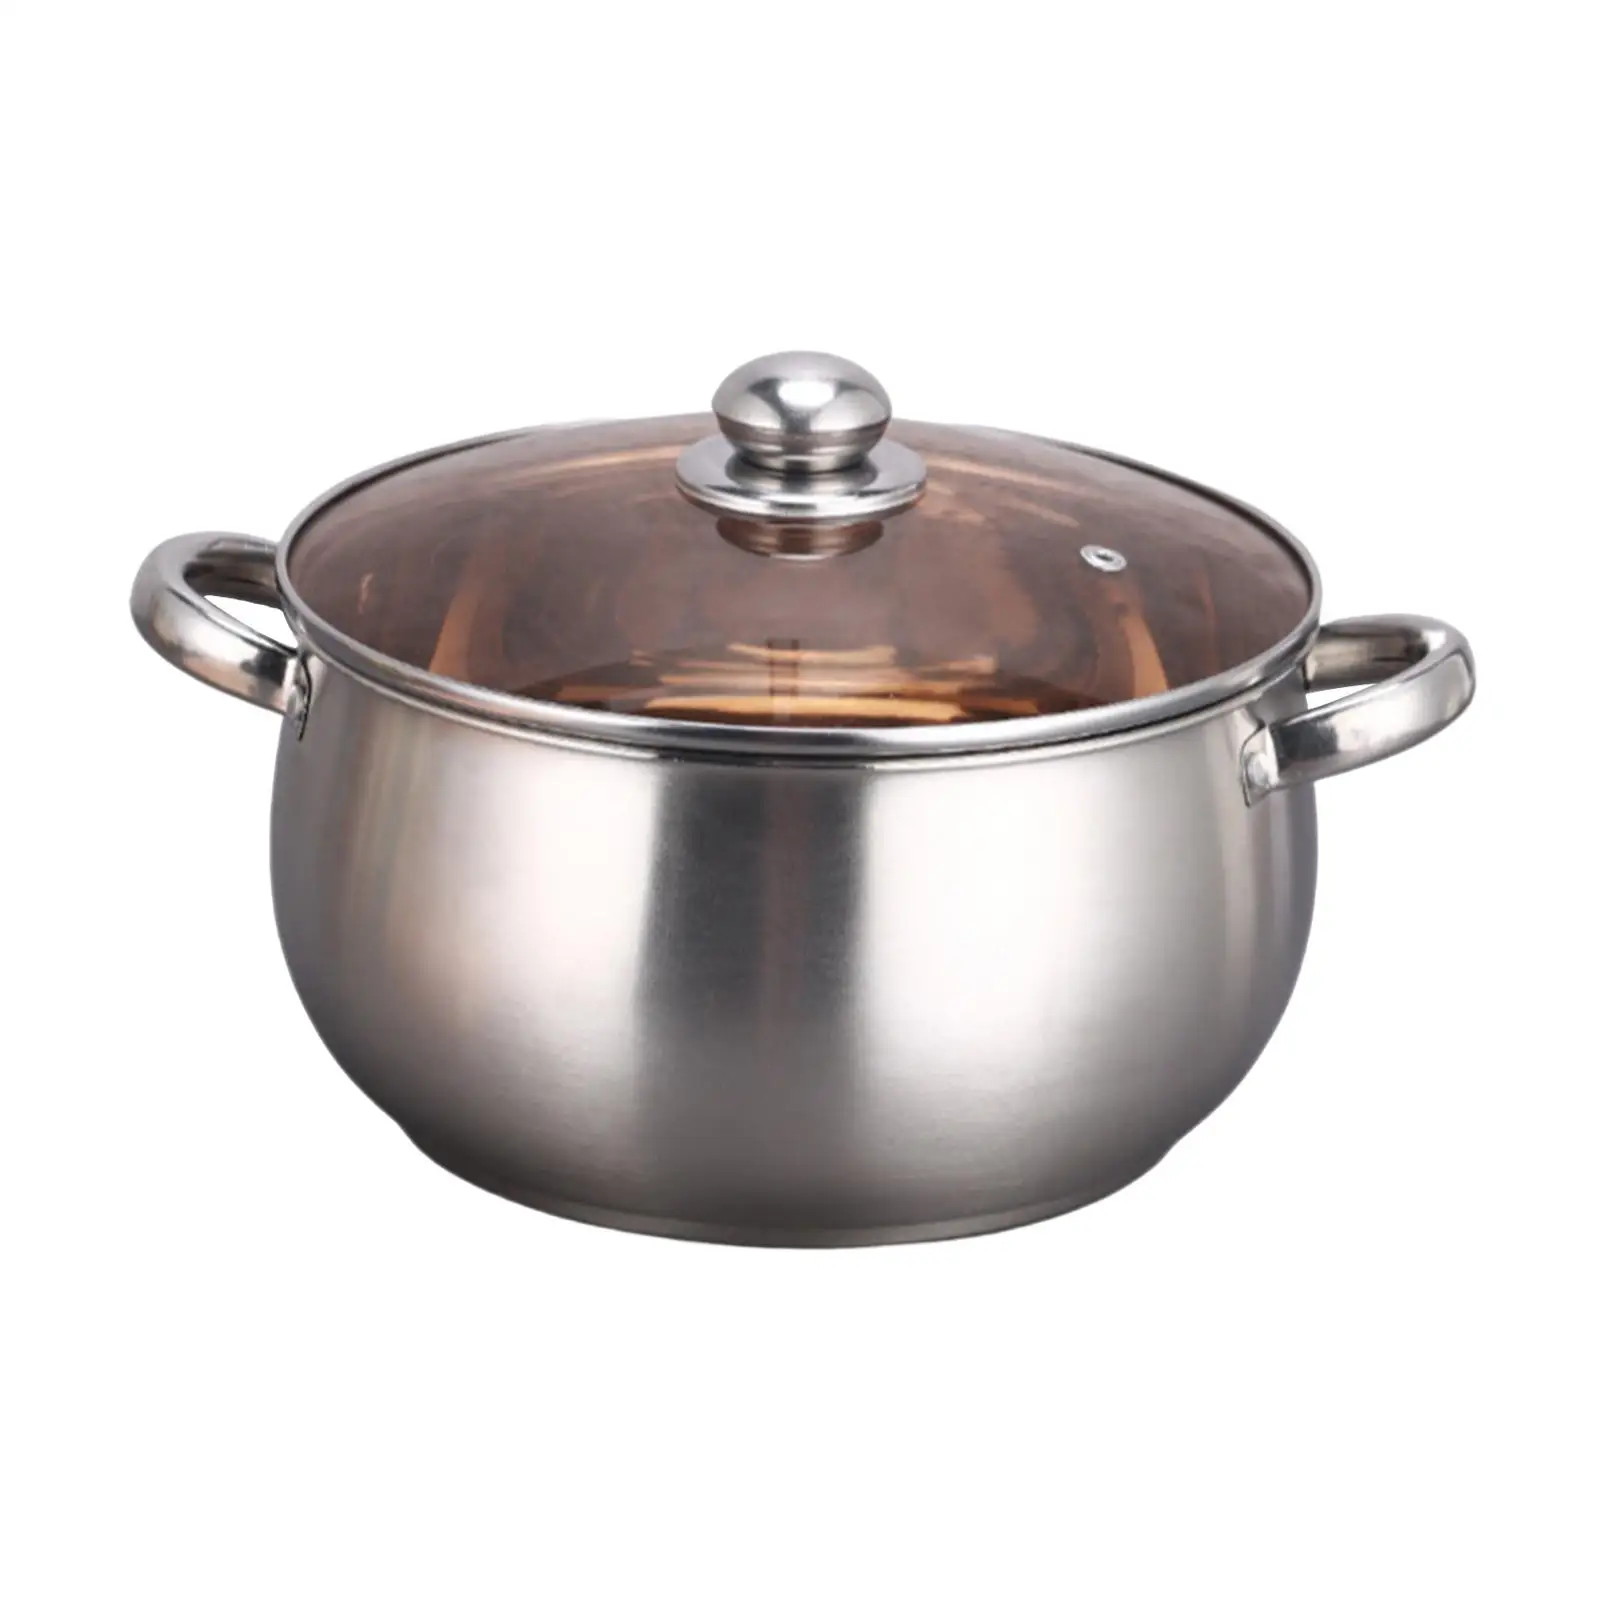 Stainless Steel Stockpot with Lid Heavy Duty Heatproof Handle Kitchen Cooking Pot for Cooking Eggs Warming Milk Vegetables Meat